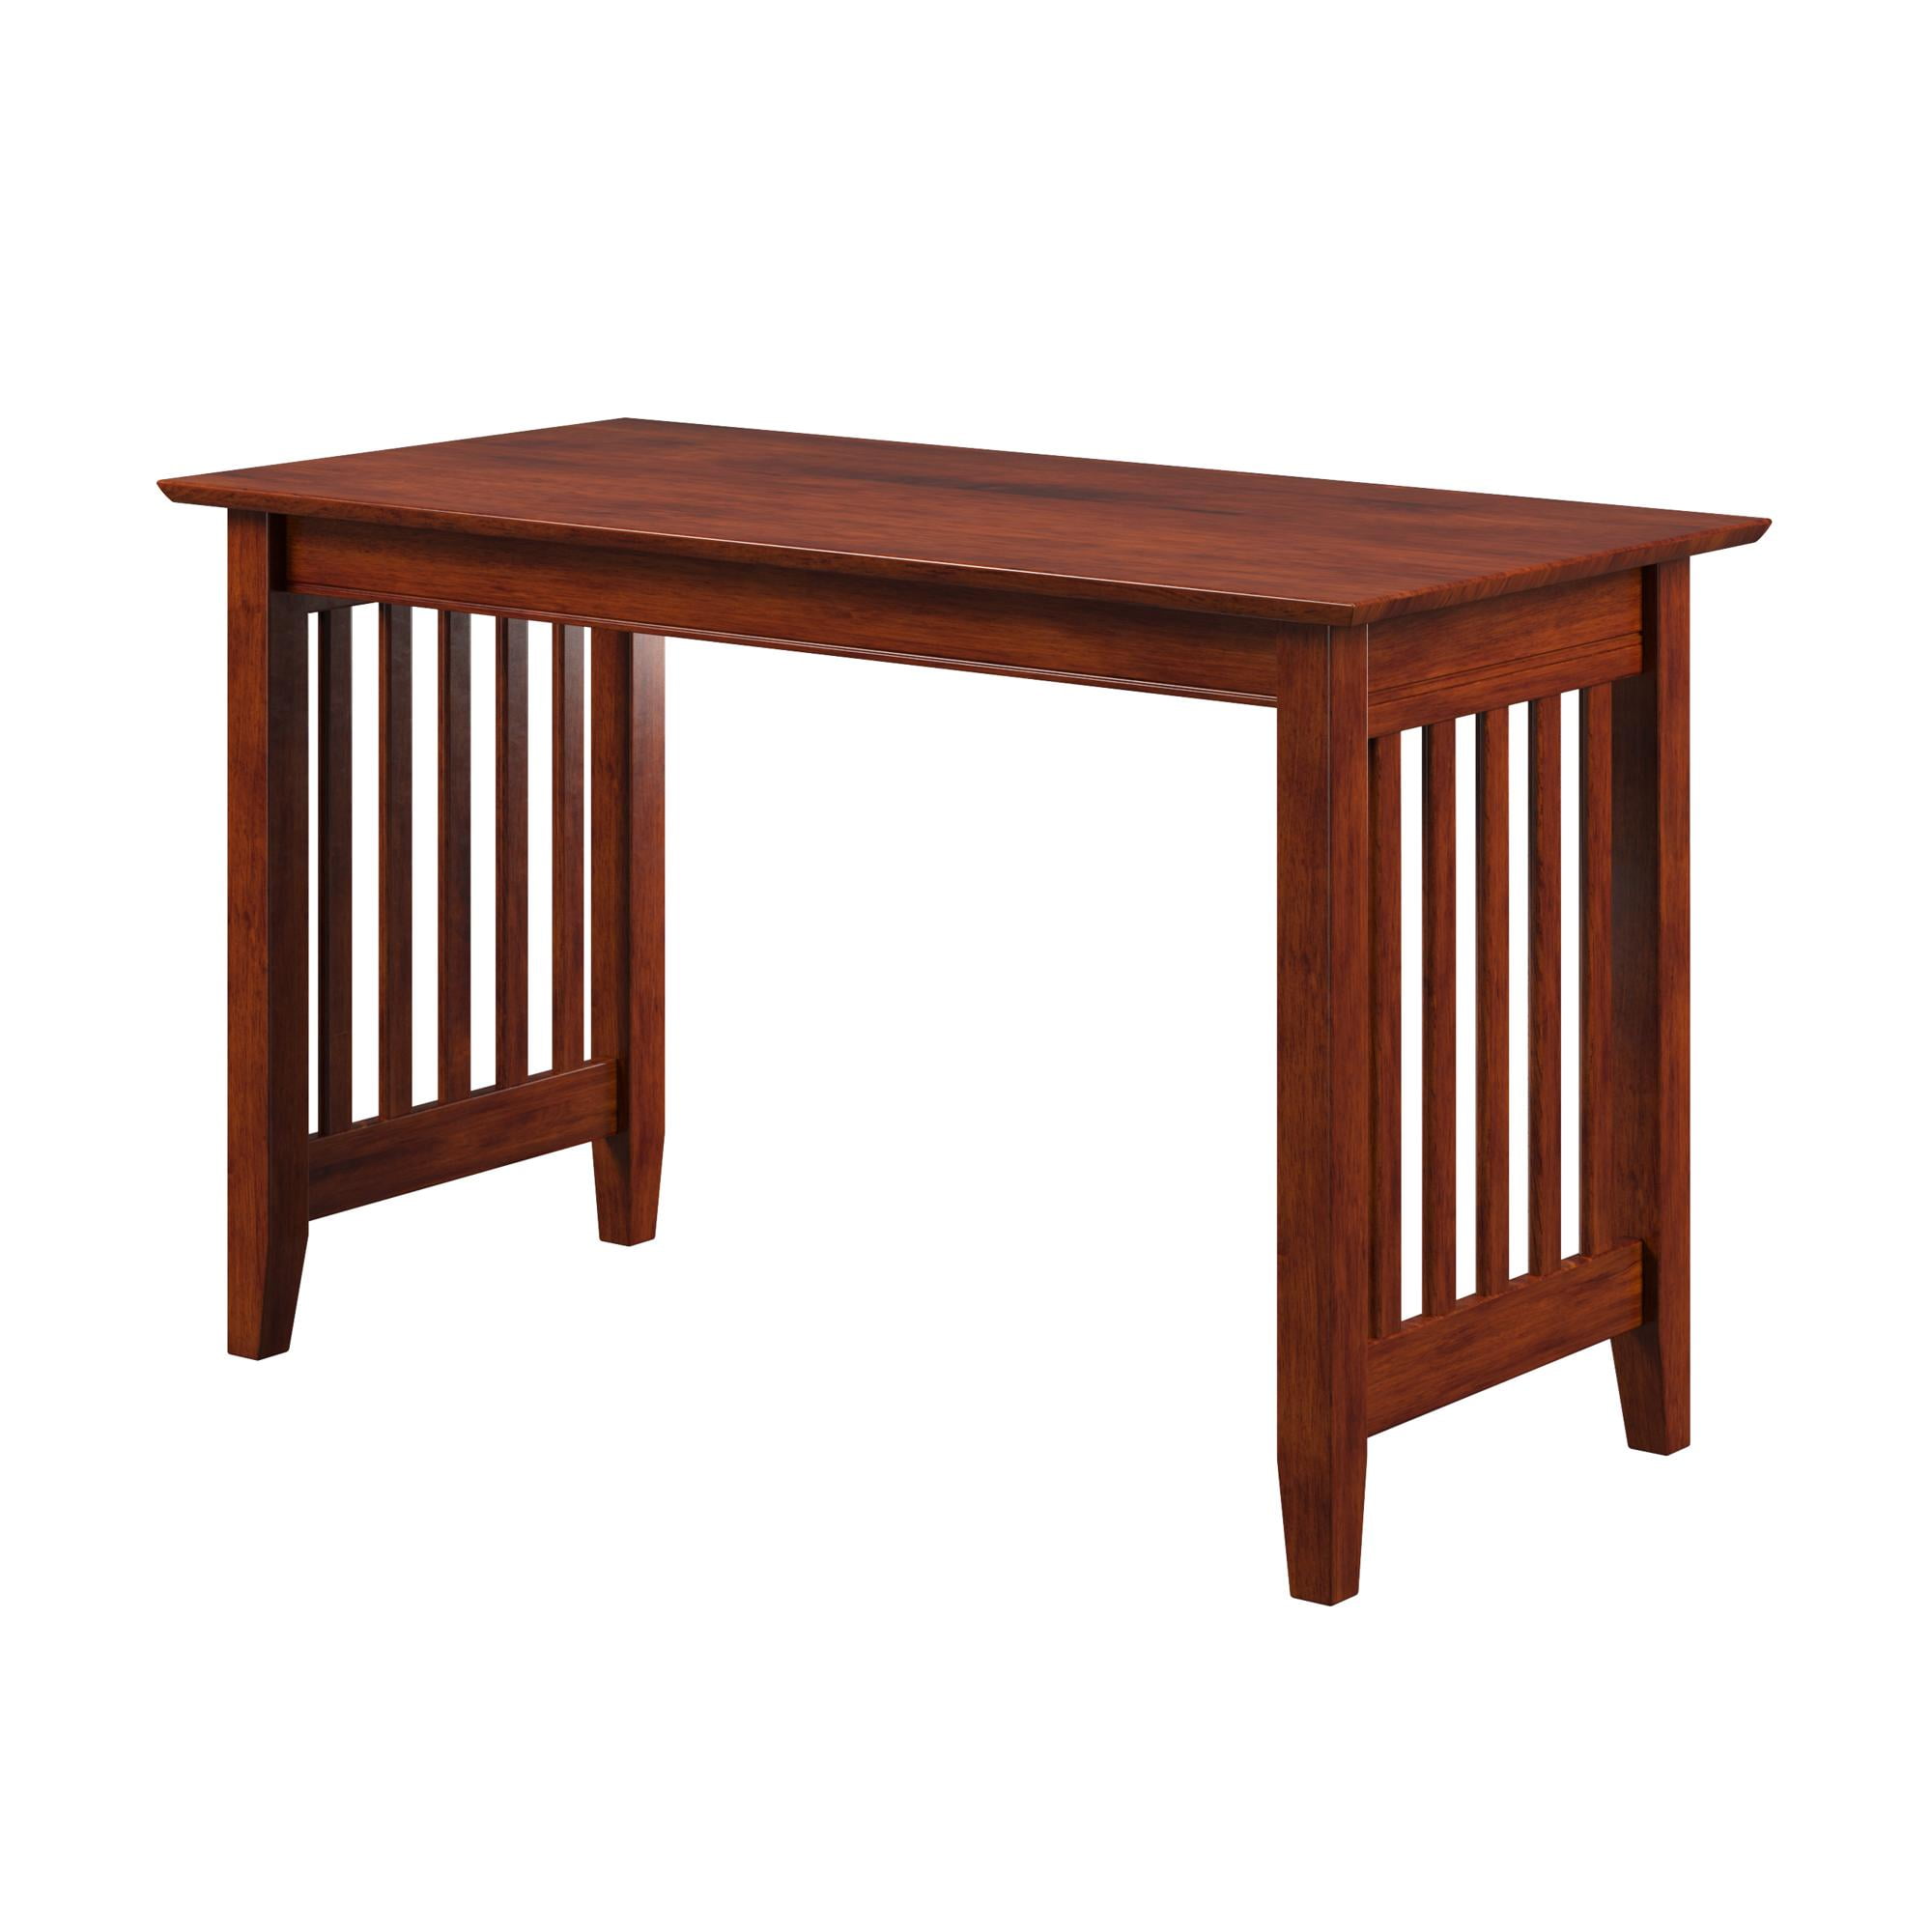 Picture of Atlantic Furniture AH11214 Mission Work Table - Antique Walnut